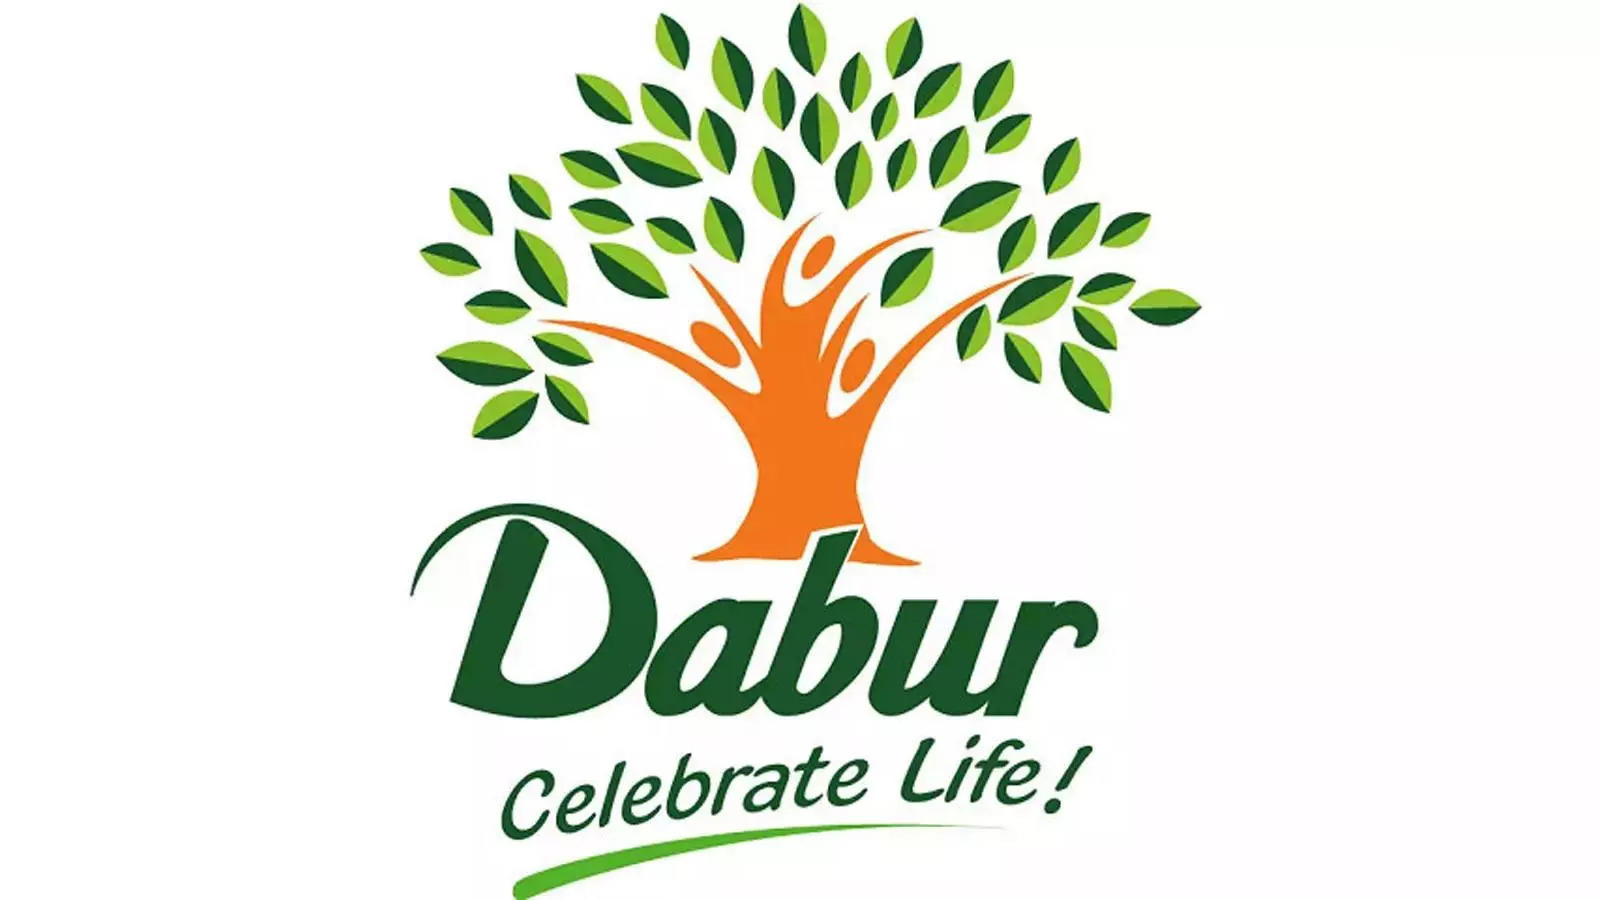 140-year-old Dabur family hits trouble as it reinvents its business - The Economic Times